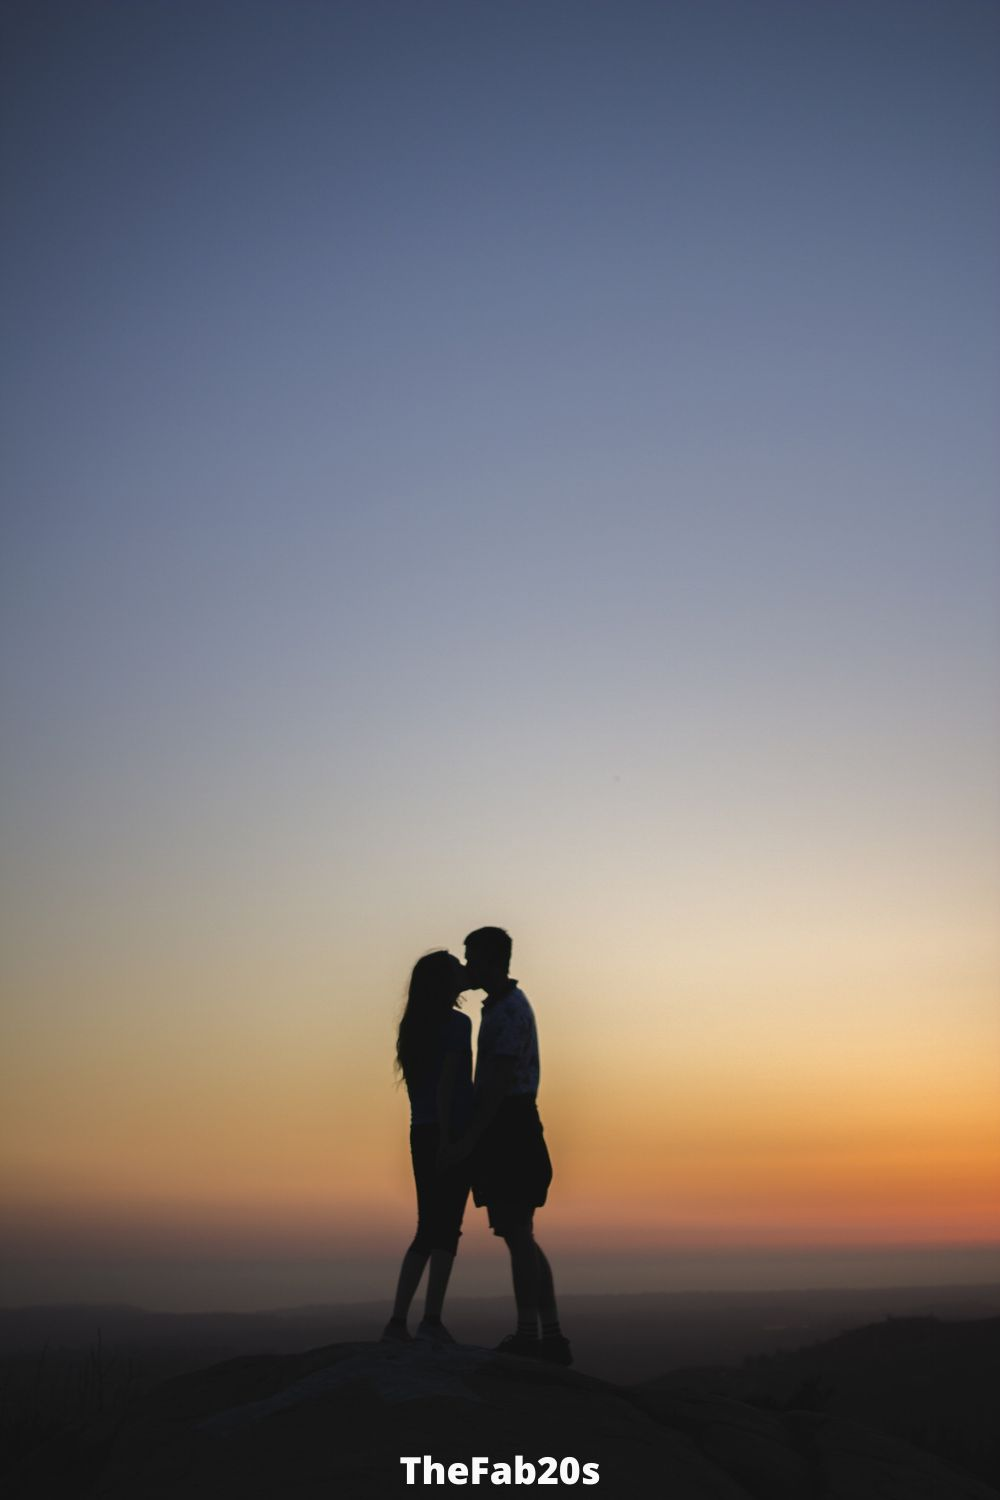 Couple kissing at sunset - Healthy relationships have clear expectations and boundaries